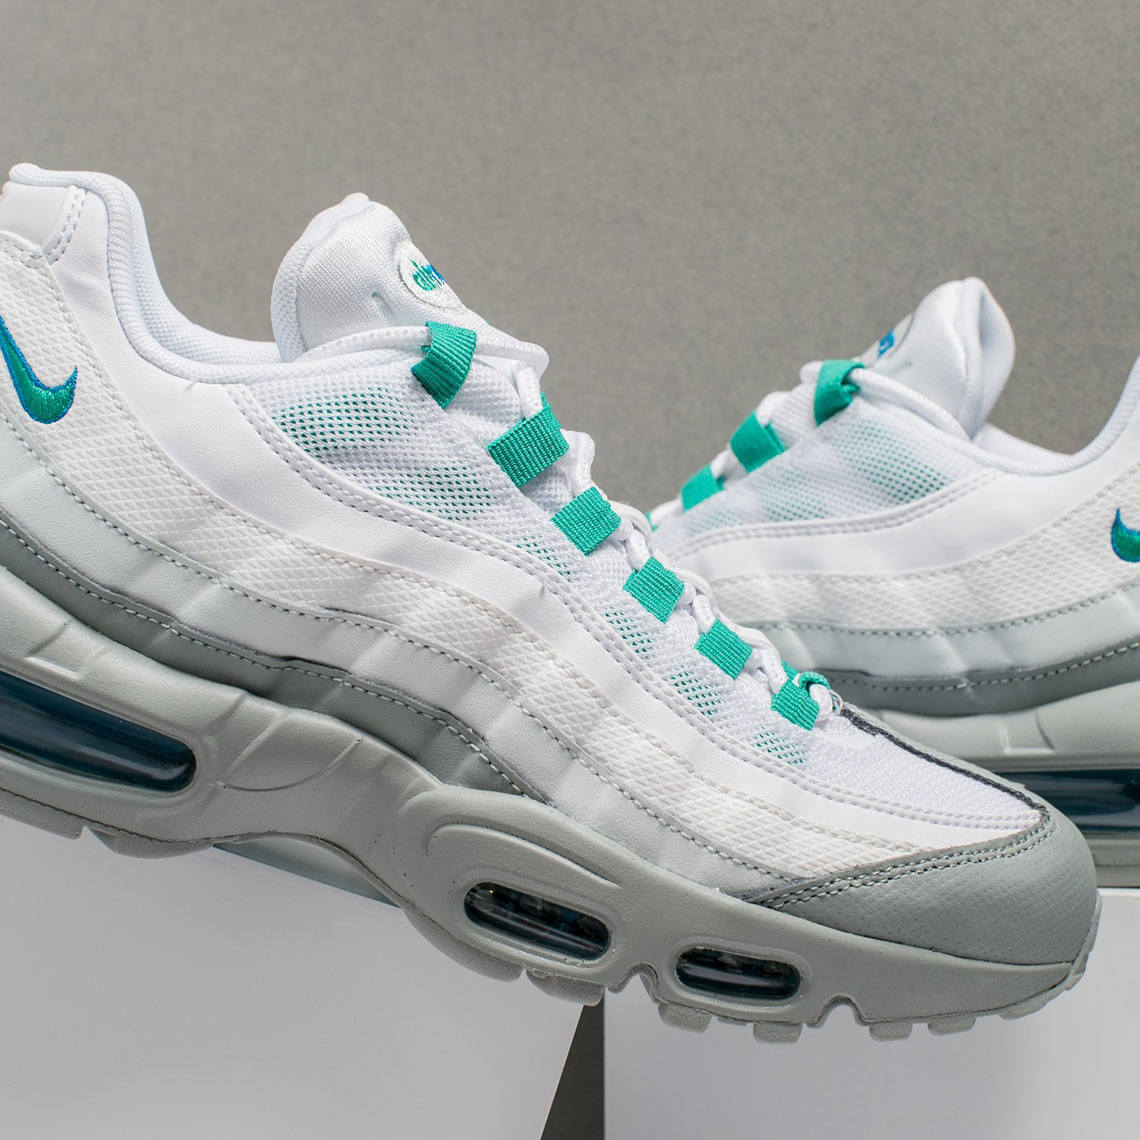 Nike Air Max95 Clear Emerald Buy Now 3